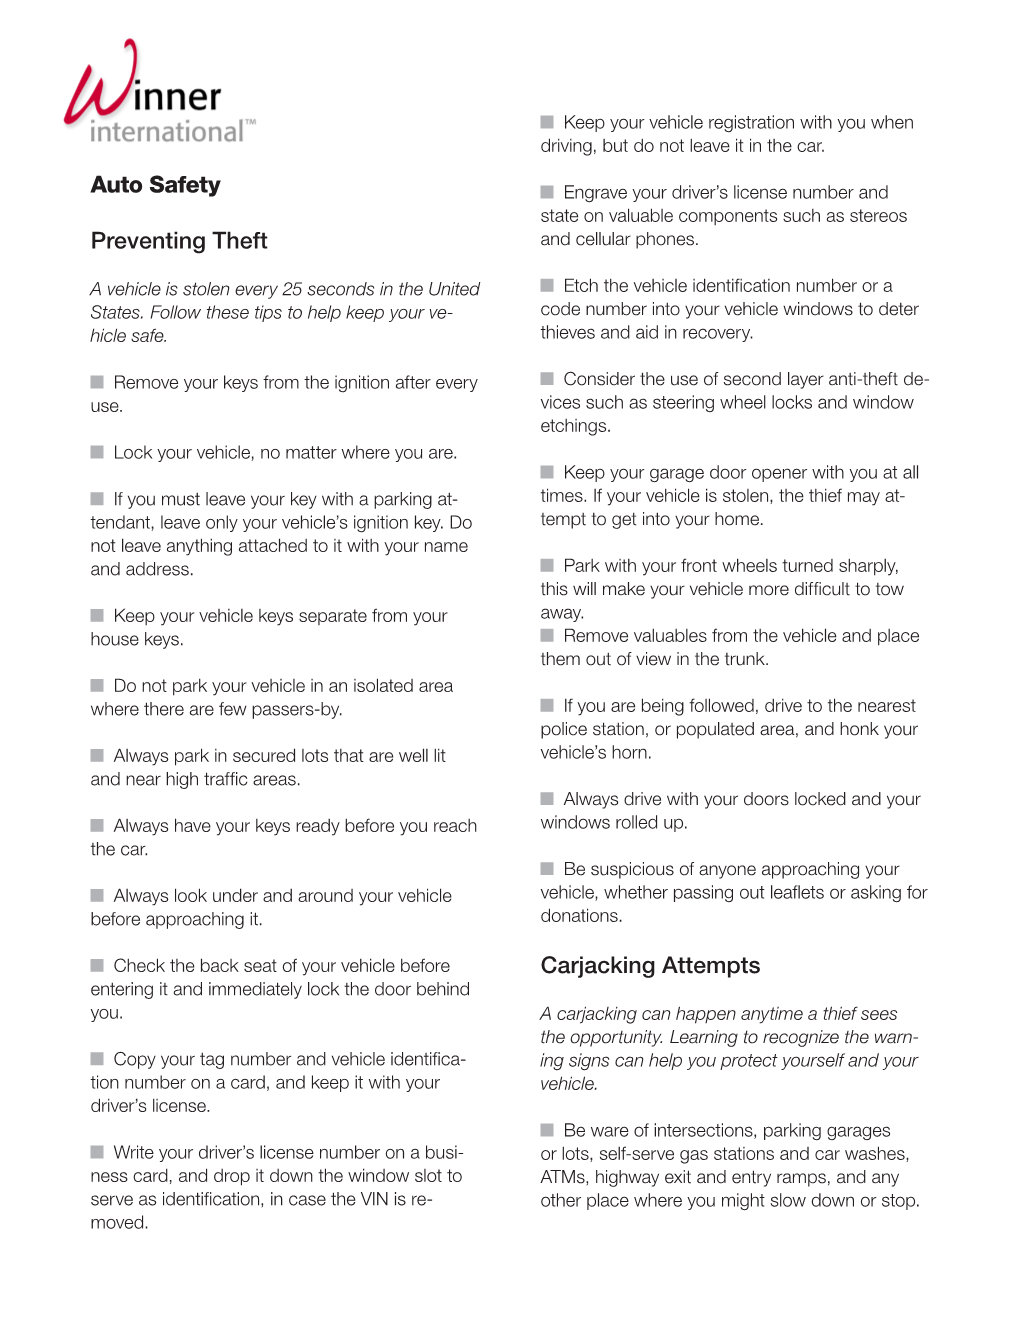 Auto Safety Tips